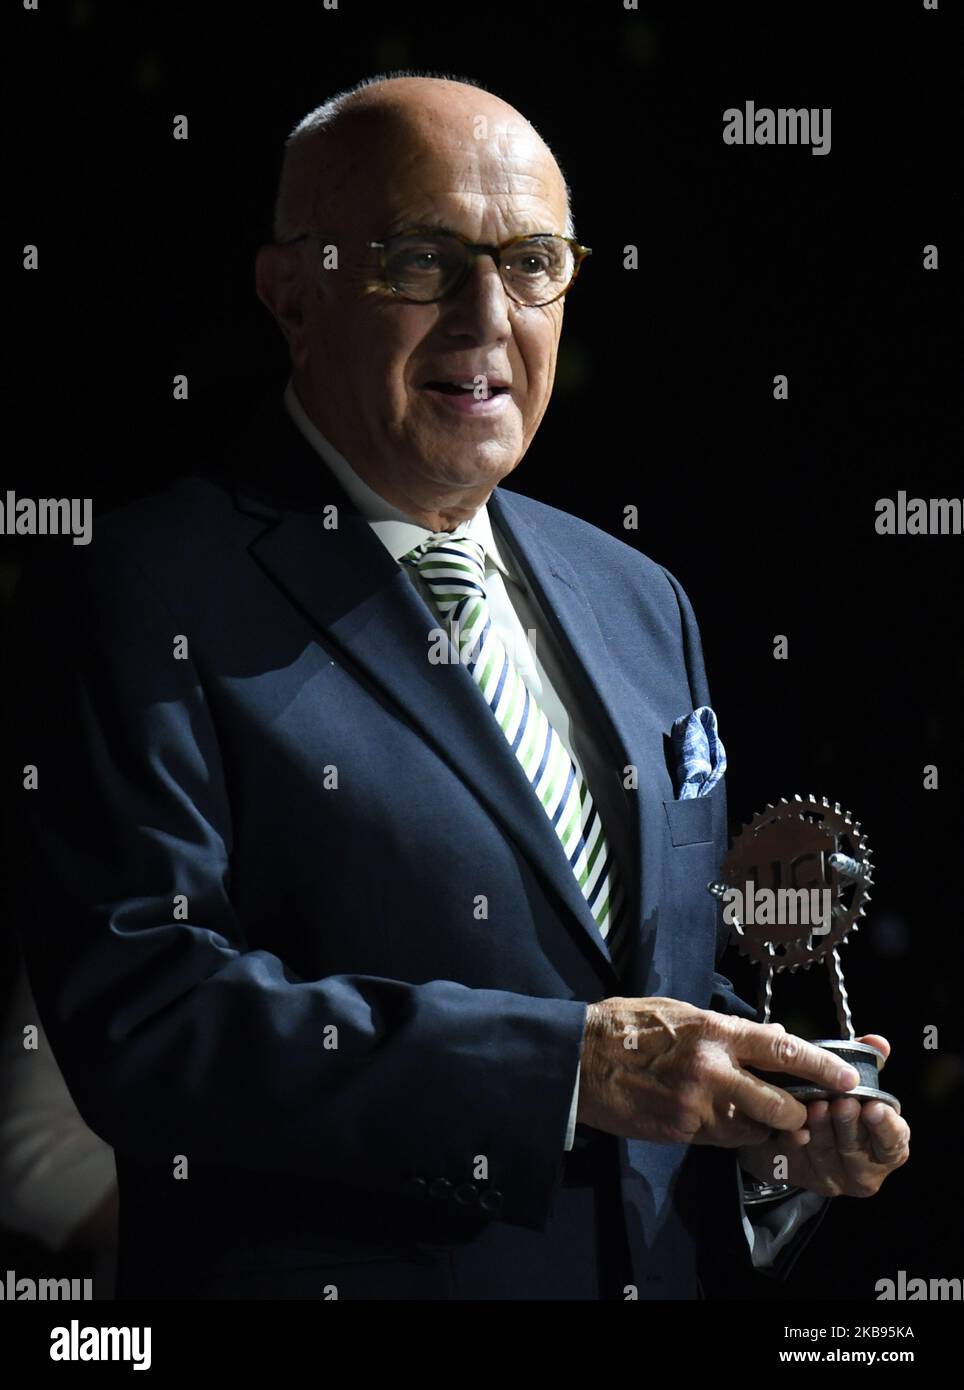 Artur Lopes, President of the UCI Remuneration Commission and Vice-President of the Portuguese National Olympic Committee, seen during the 5th UCI Cycling Gala in Guilin. On Tuesday, October 22, 2019, in Guilin, Guangxi Region, China. (Photo by Artur Widak/NurPhoto) Stock Photo